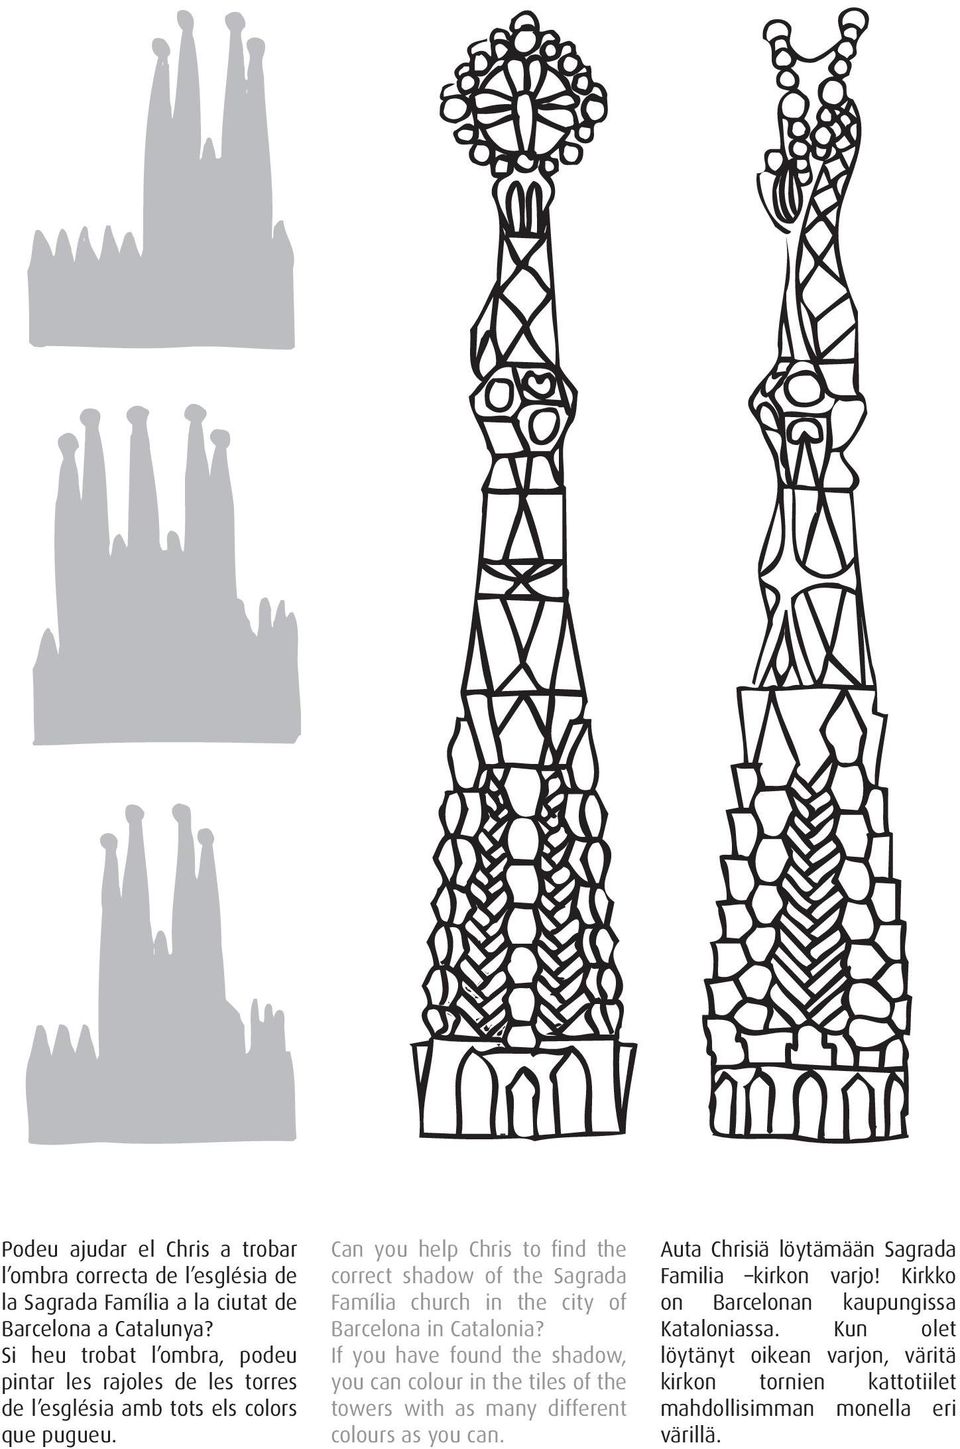 Can you help Chris to find the correct shadow of the Sagrada Família church in the city of Barcelona in Catalonia?